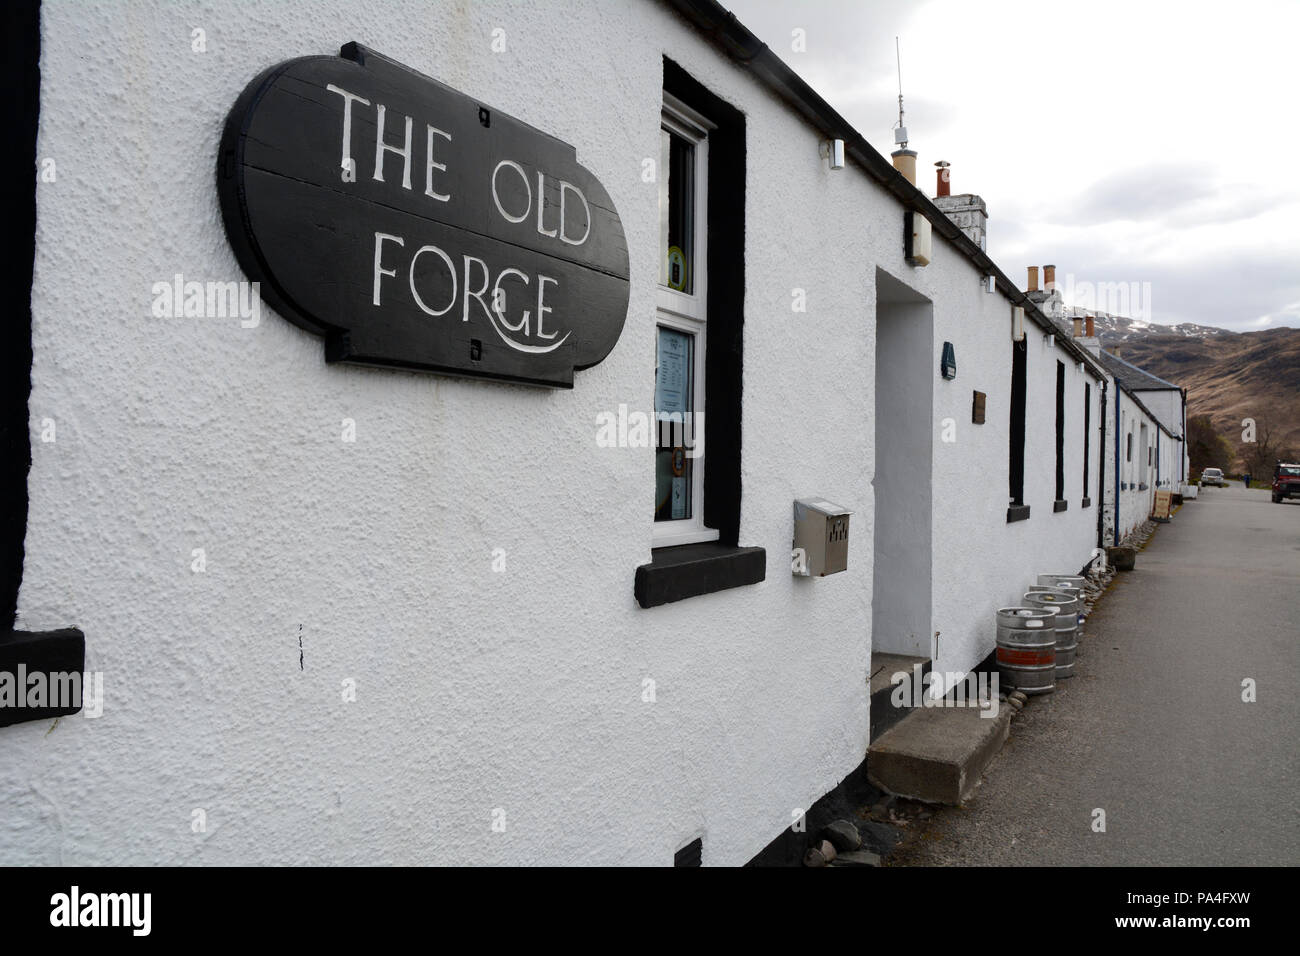 The exterior of The Old Forge, the most remote pub in the mainland UK, in the town of Inverie, Knoydart Peninsula, Scotland, Great Britain. Stock Photo